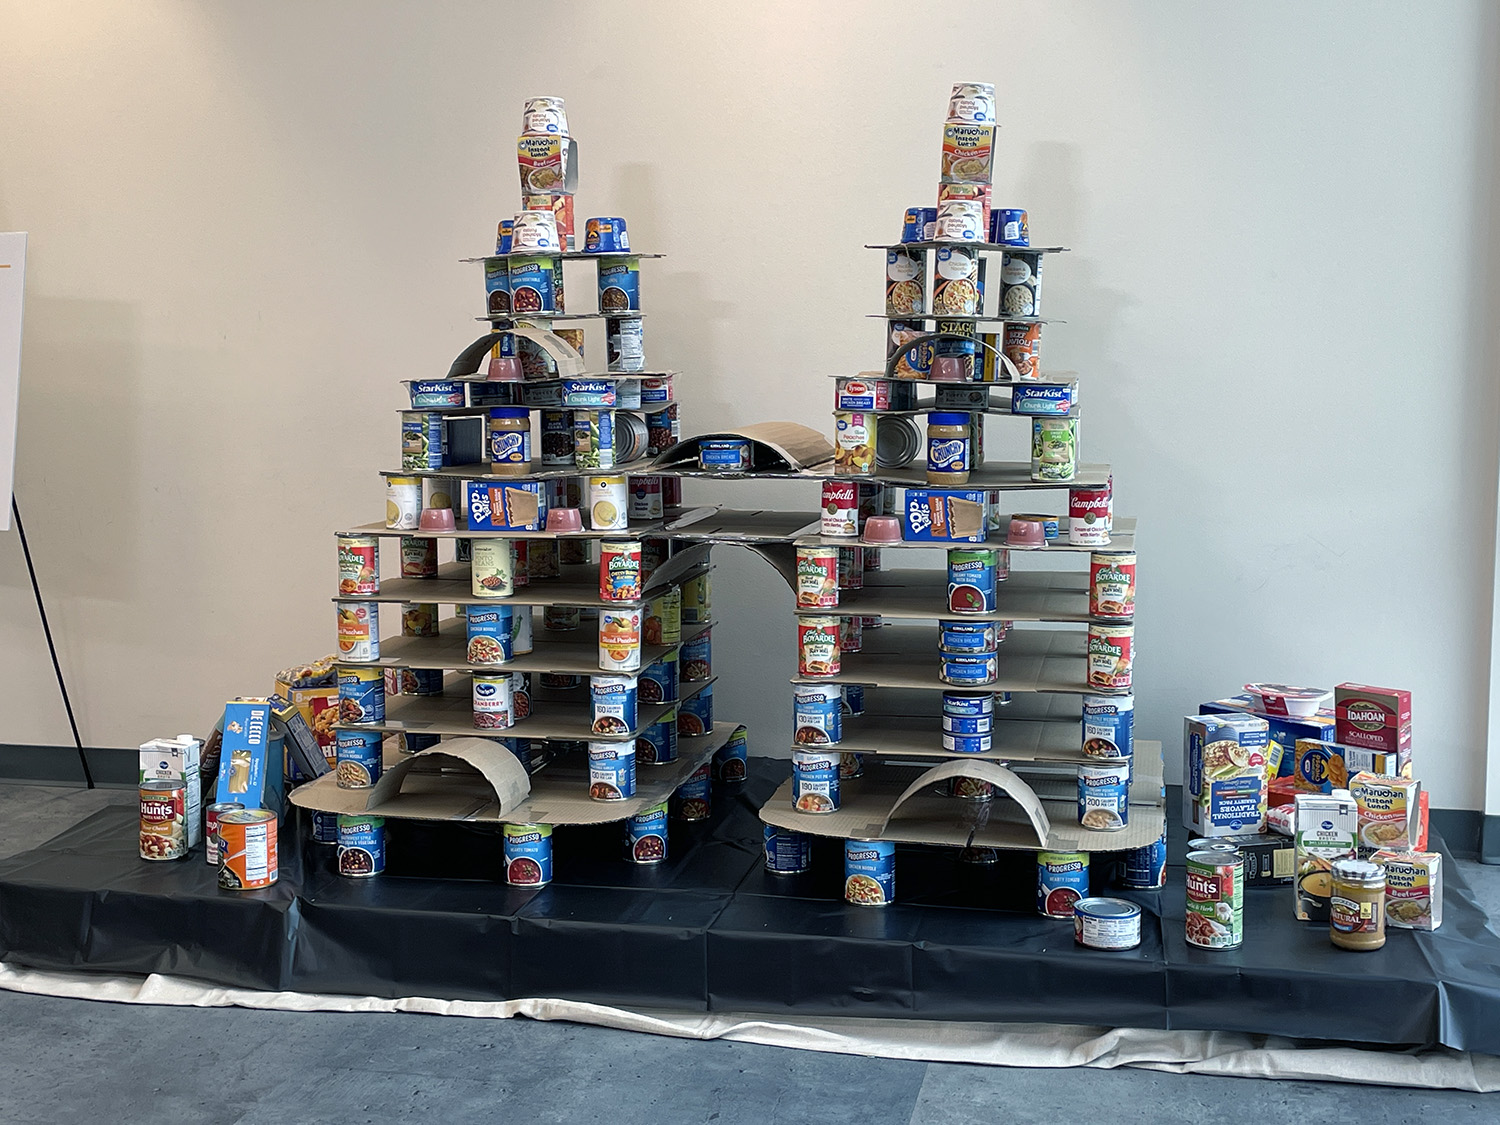 A structure made of cans